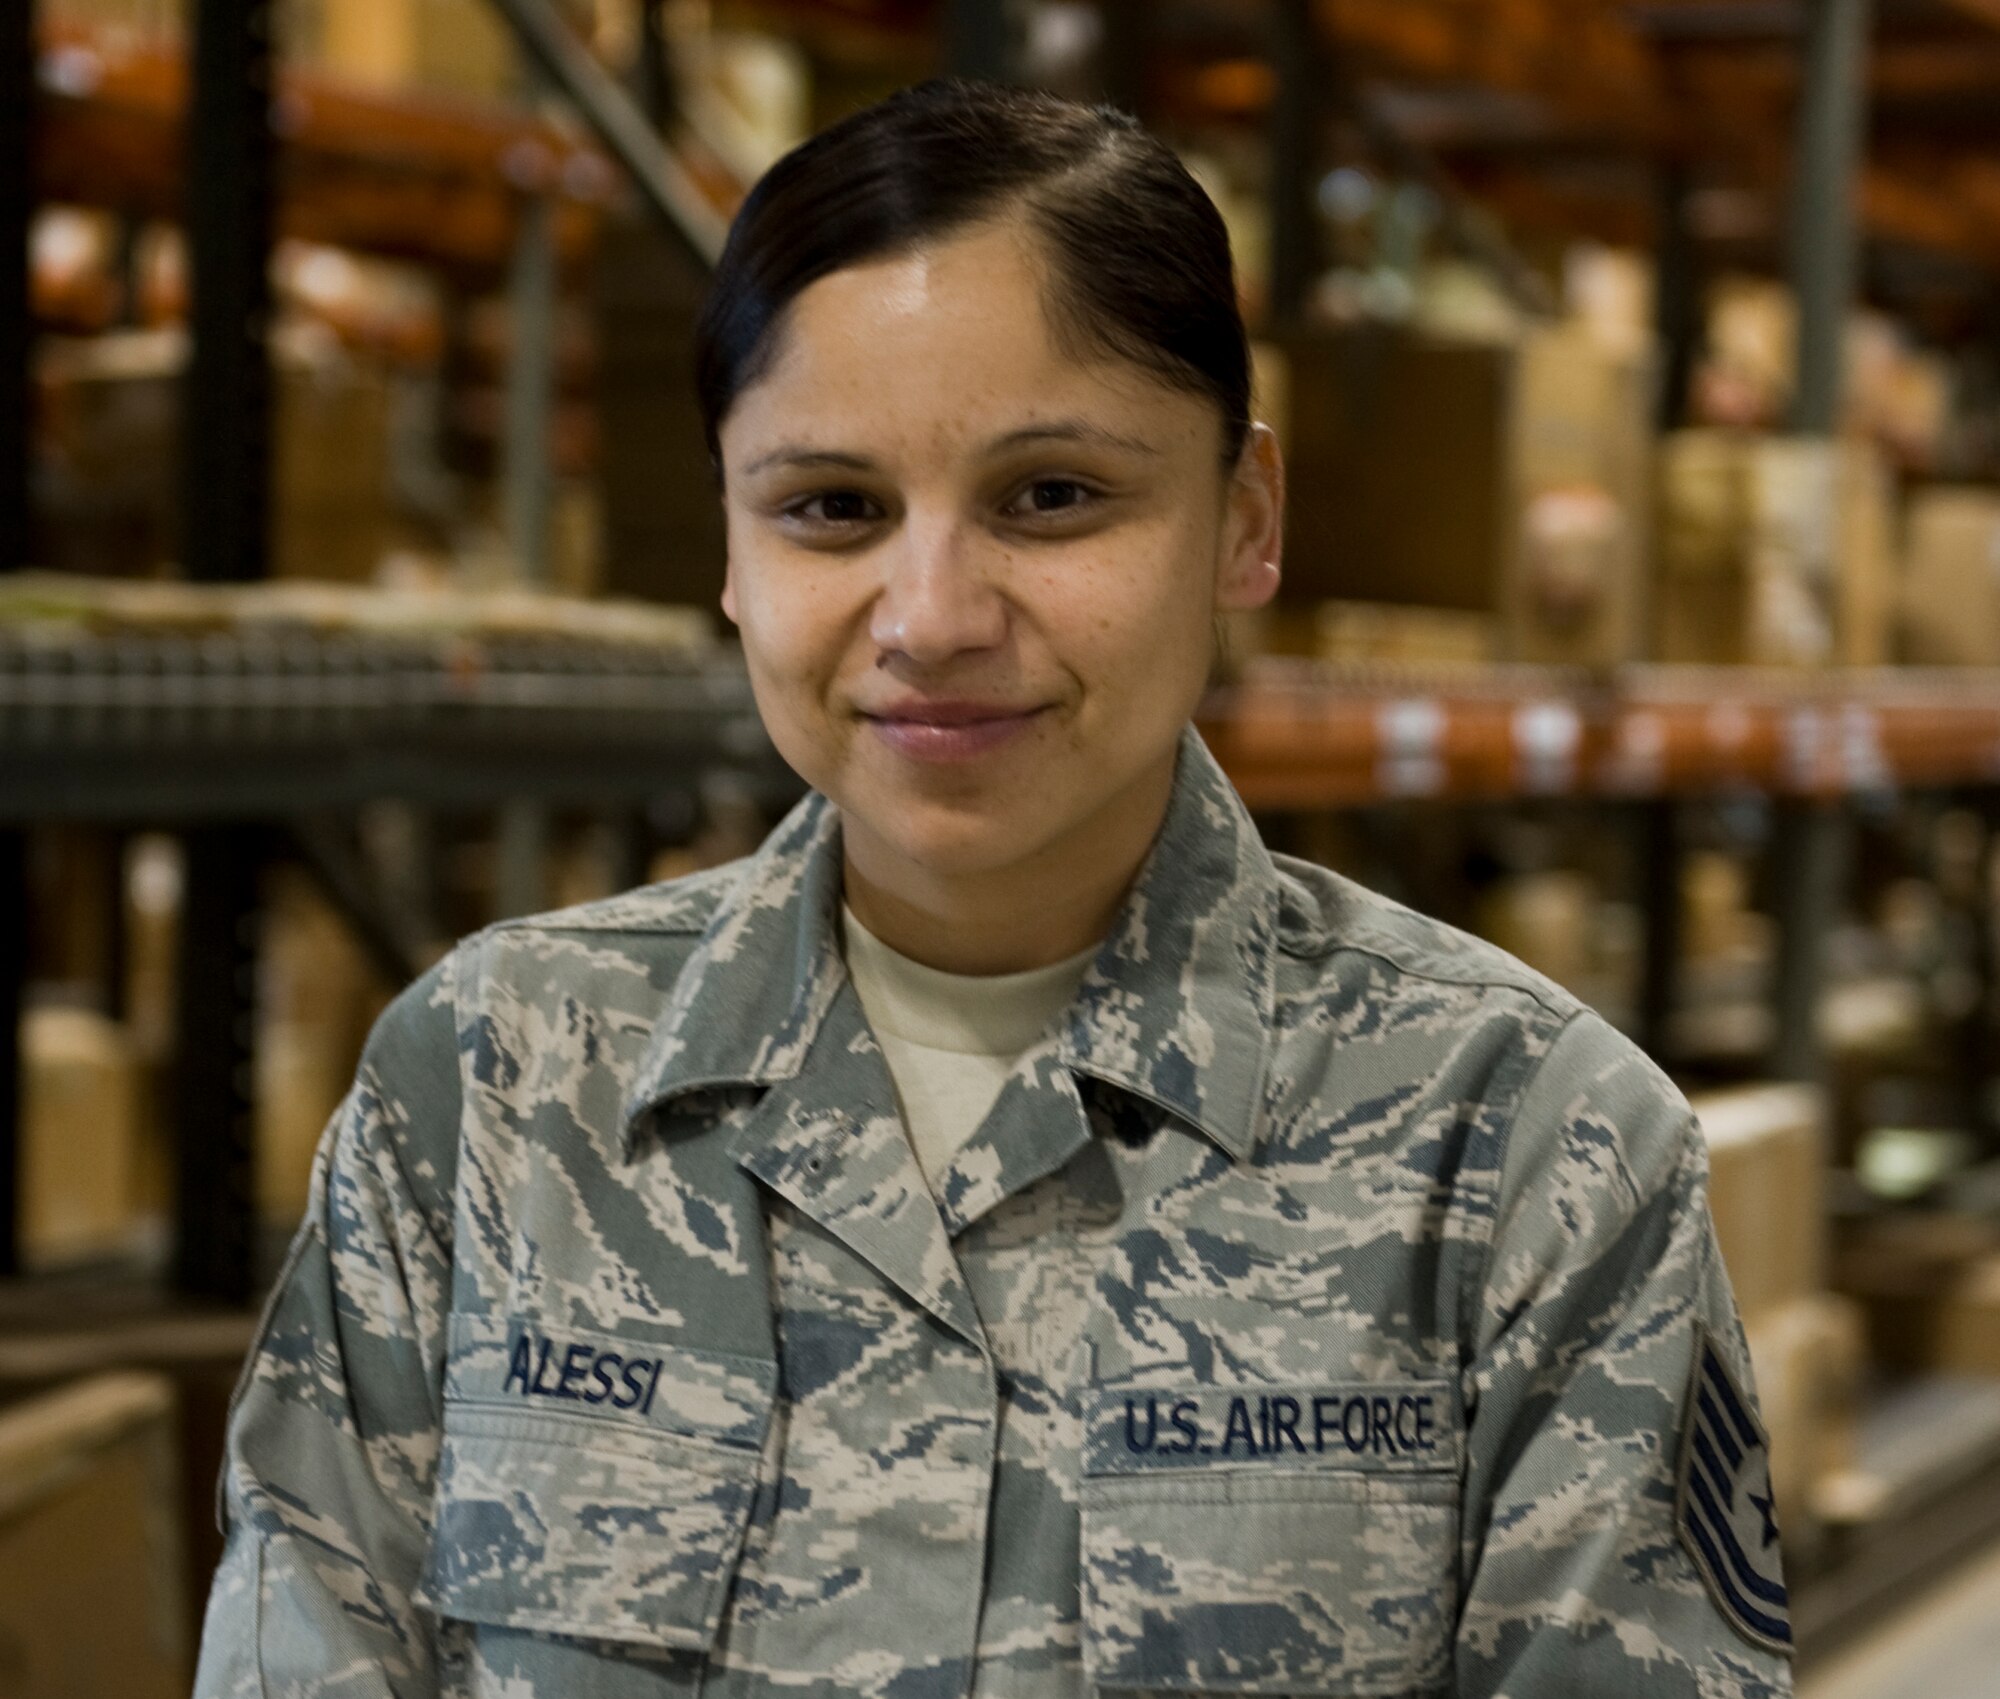 "If at the beginning of the day, I walked into my office, logged onto my email and found something stating I have been accepted as an MTL at Lackland Air Force Base." - Technical Sgt. Judith Alessi, 7th Logistics Readiness Squadron